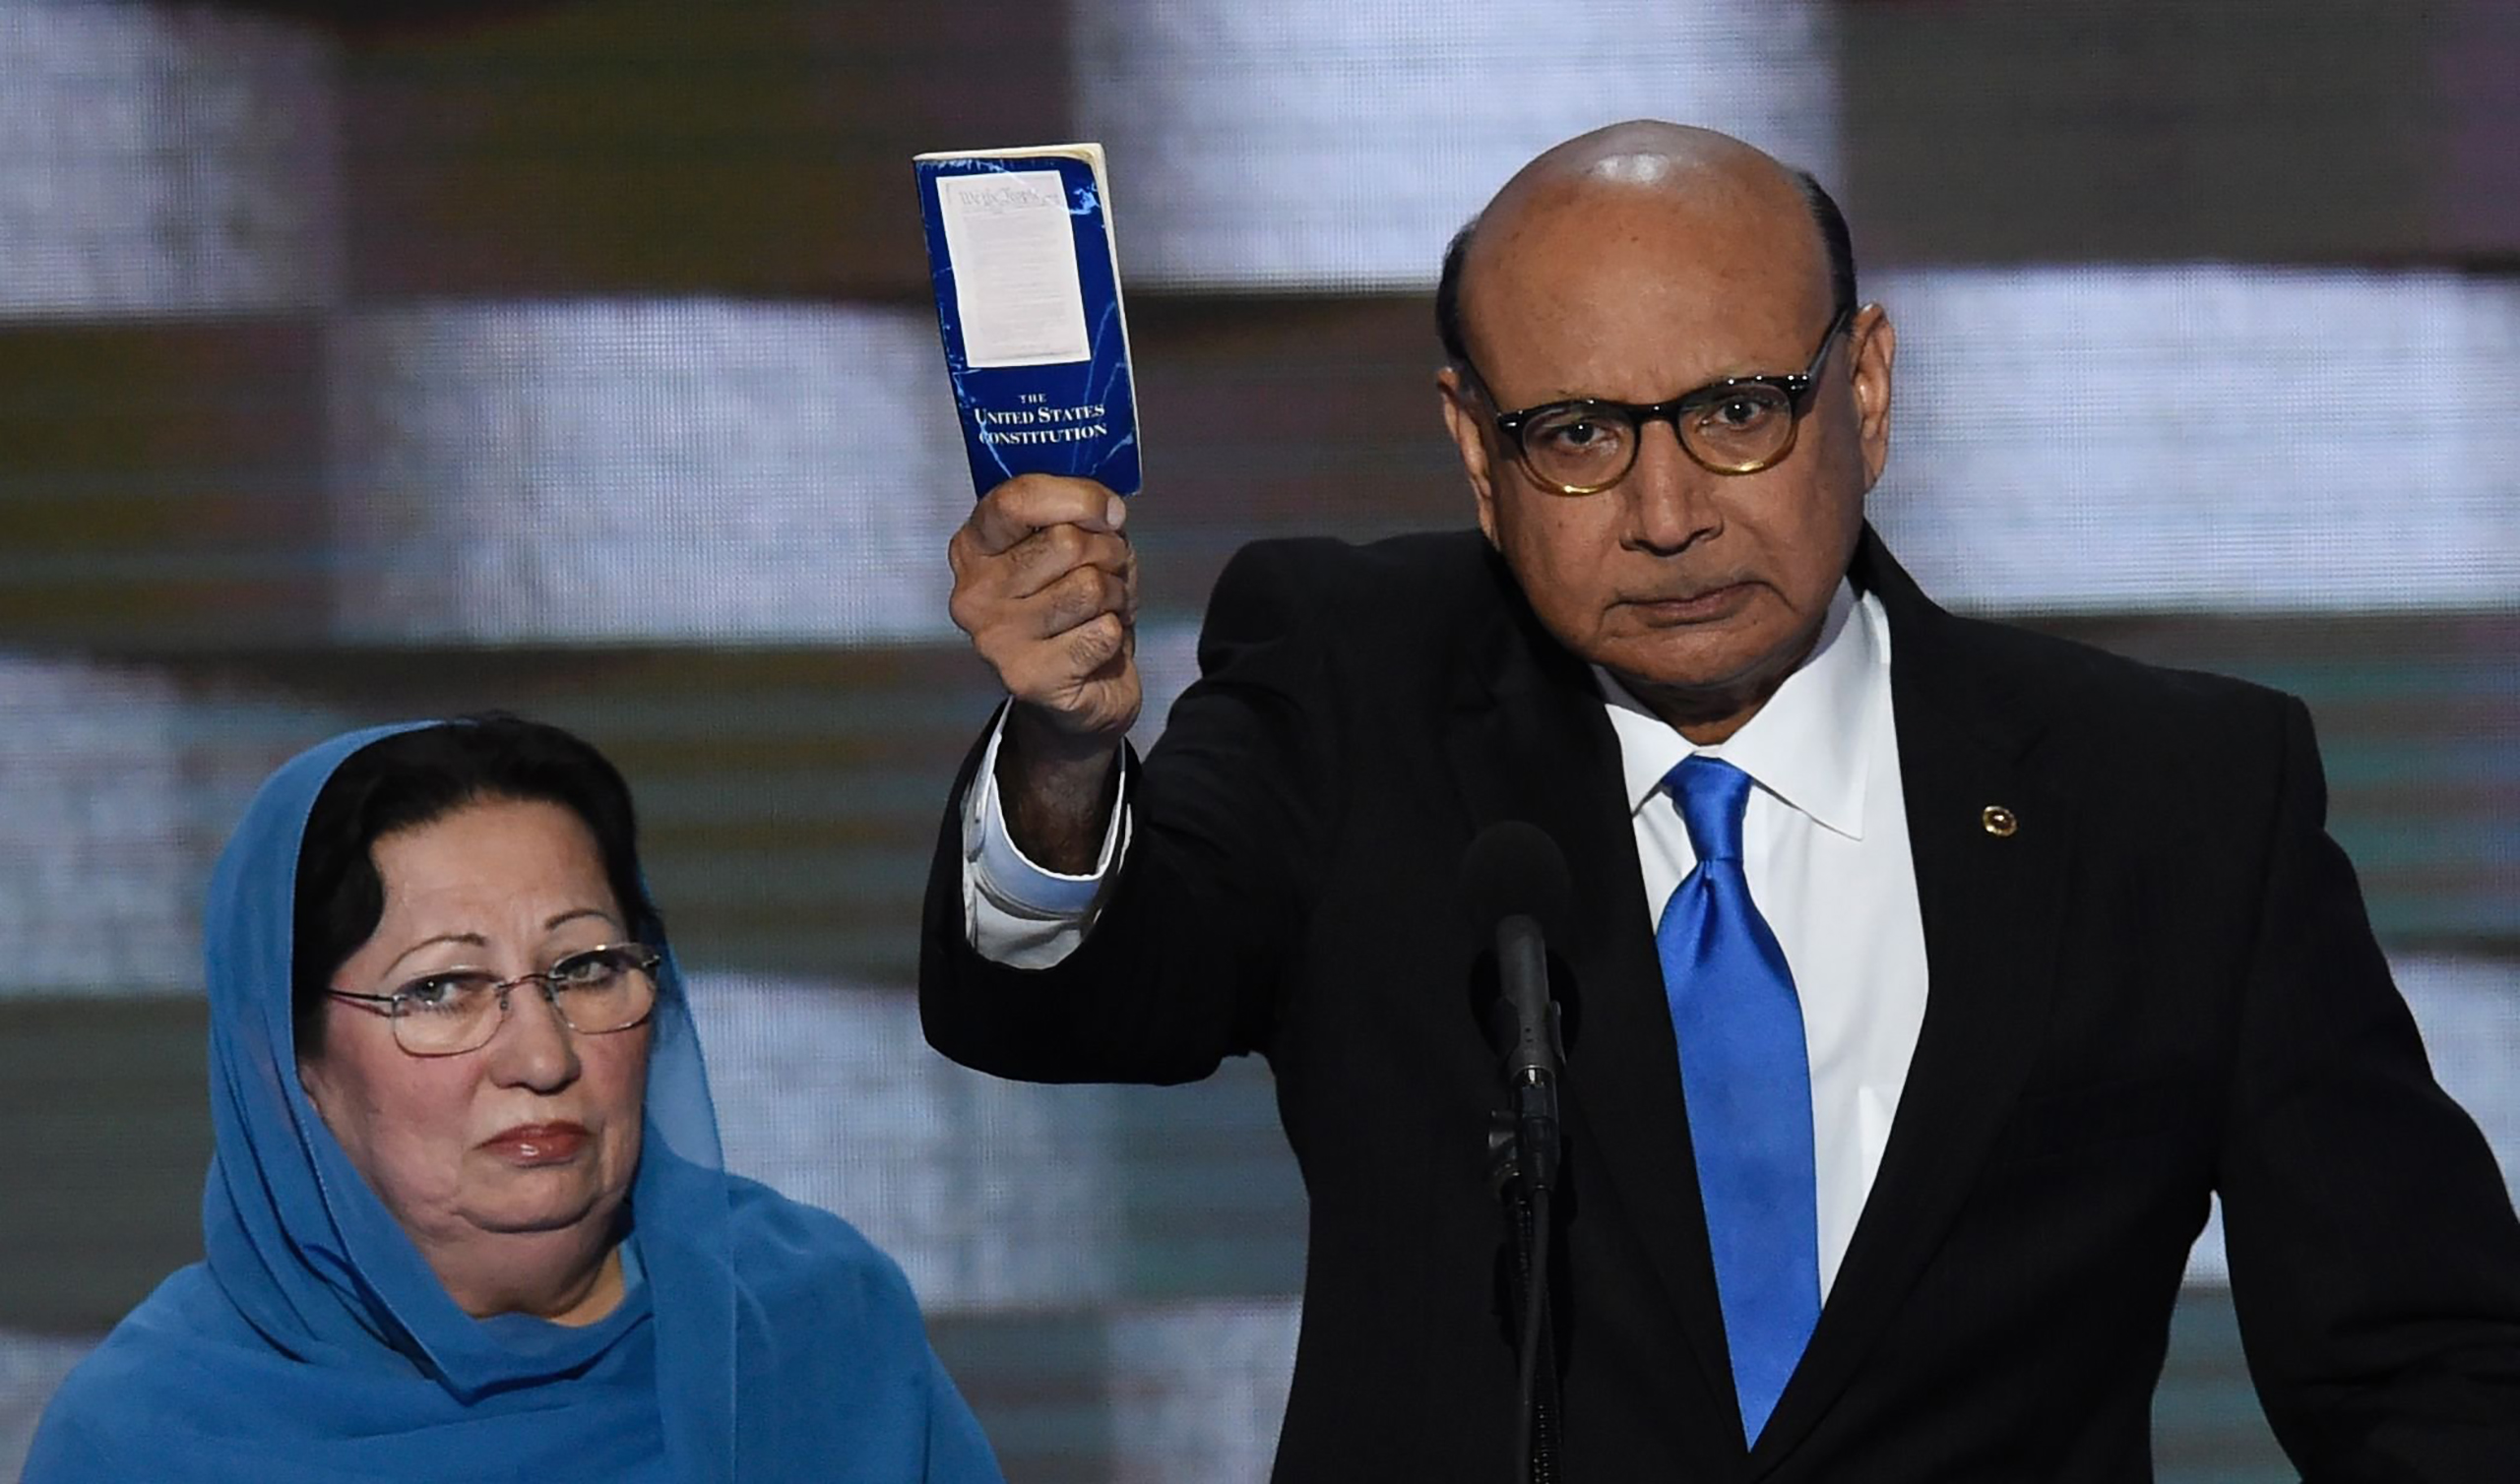 Khizr Khan holding his personal copy of the US Constitution while addressing delegates on the fourth and final day of the Democratic National Convention at Wells Fargo Center in Philadelphia, Pennsylvania, July 28, 2016. (Saul Loeb—AFP/Getty Images)